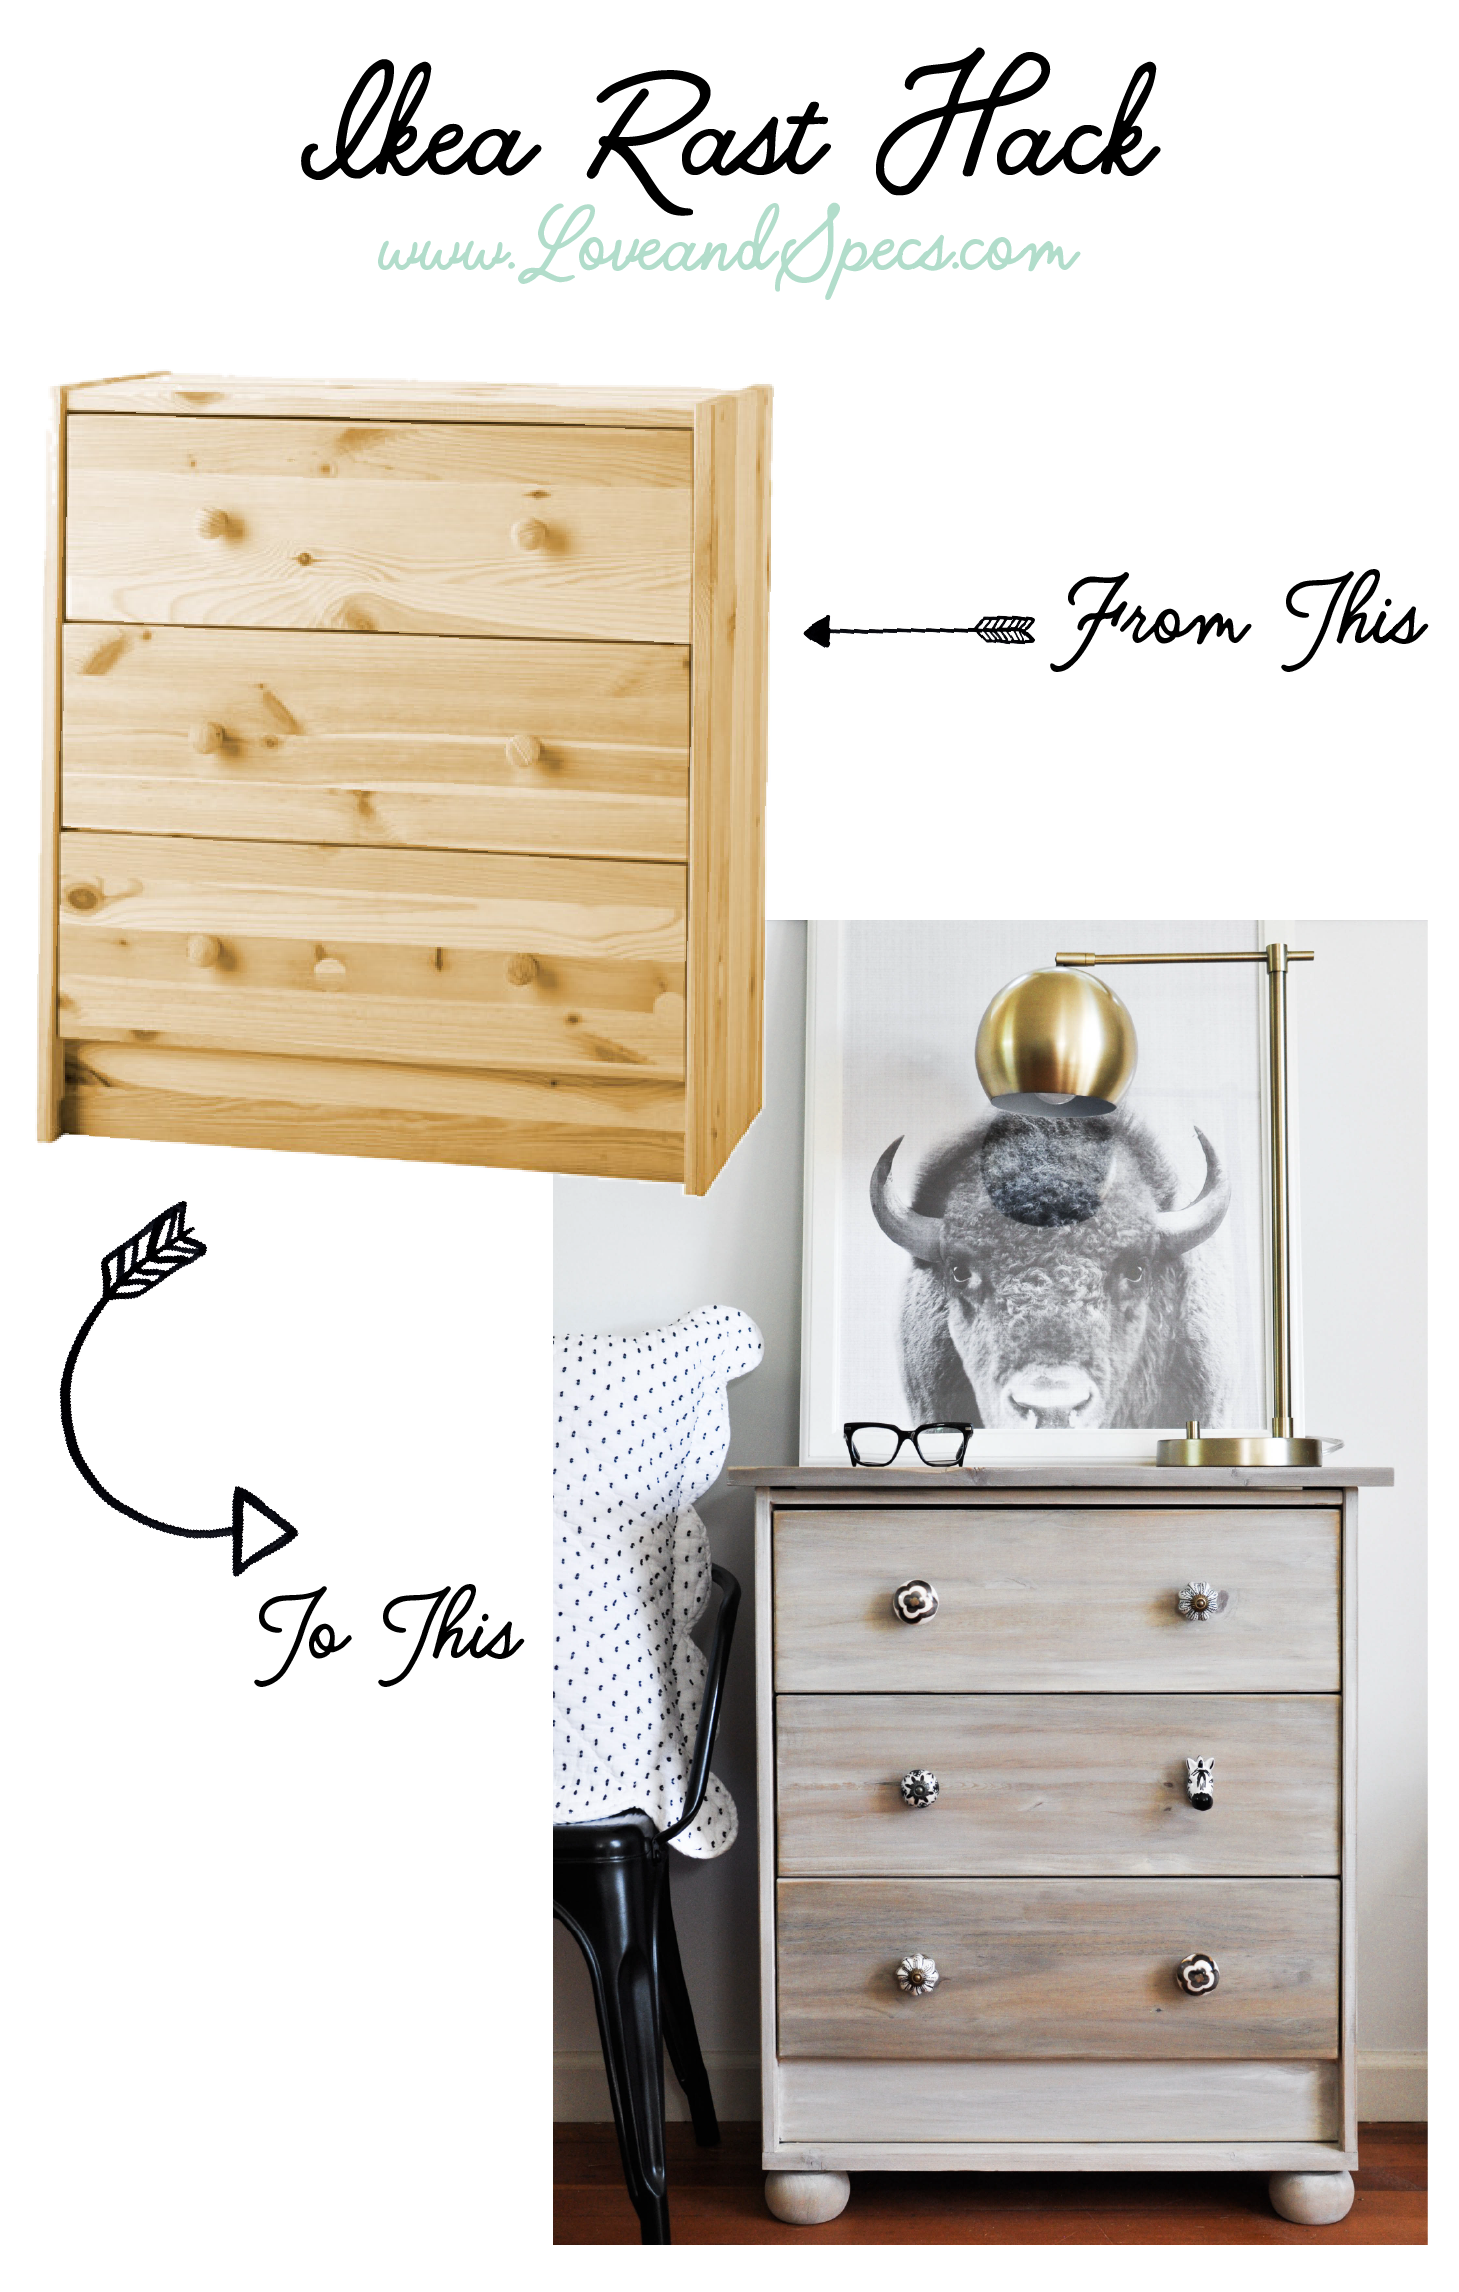 This transformed Ikea rast hack compliments the antique handles.